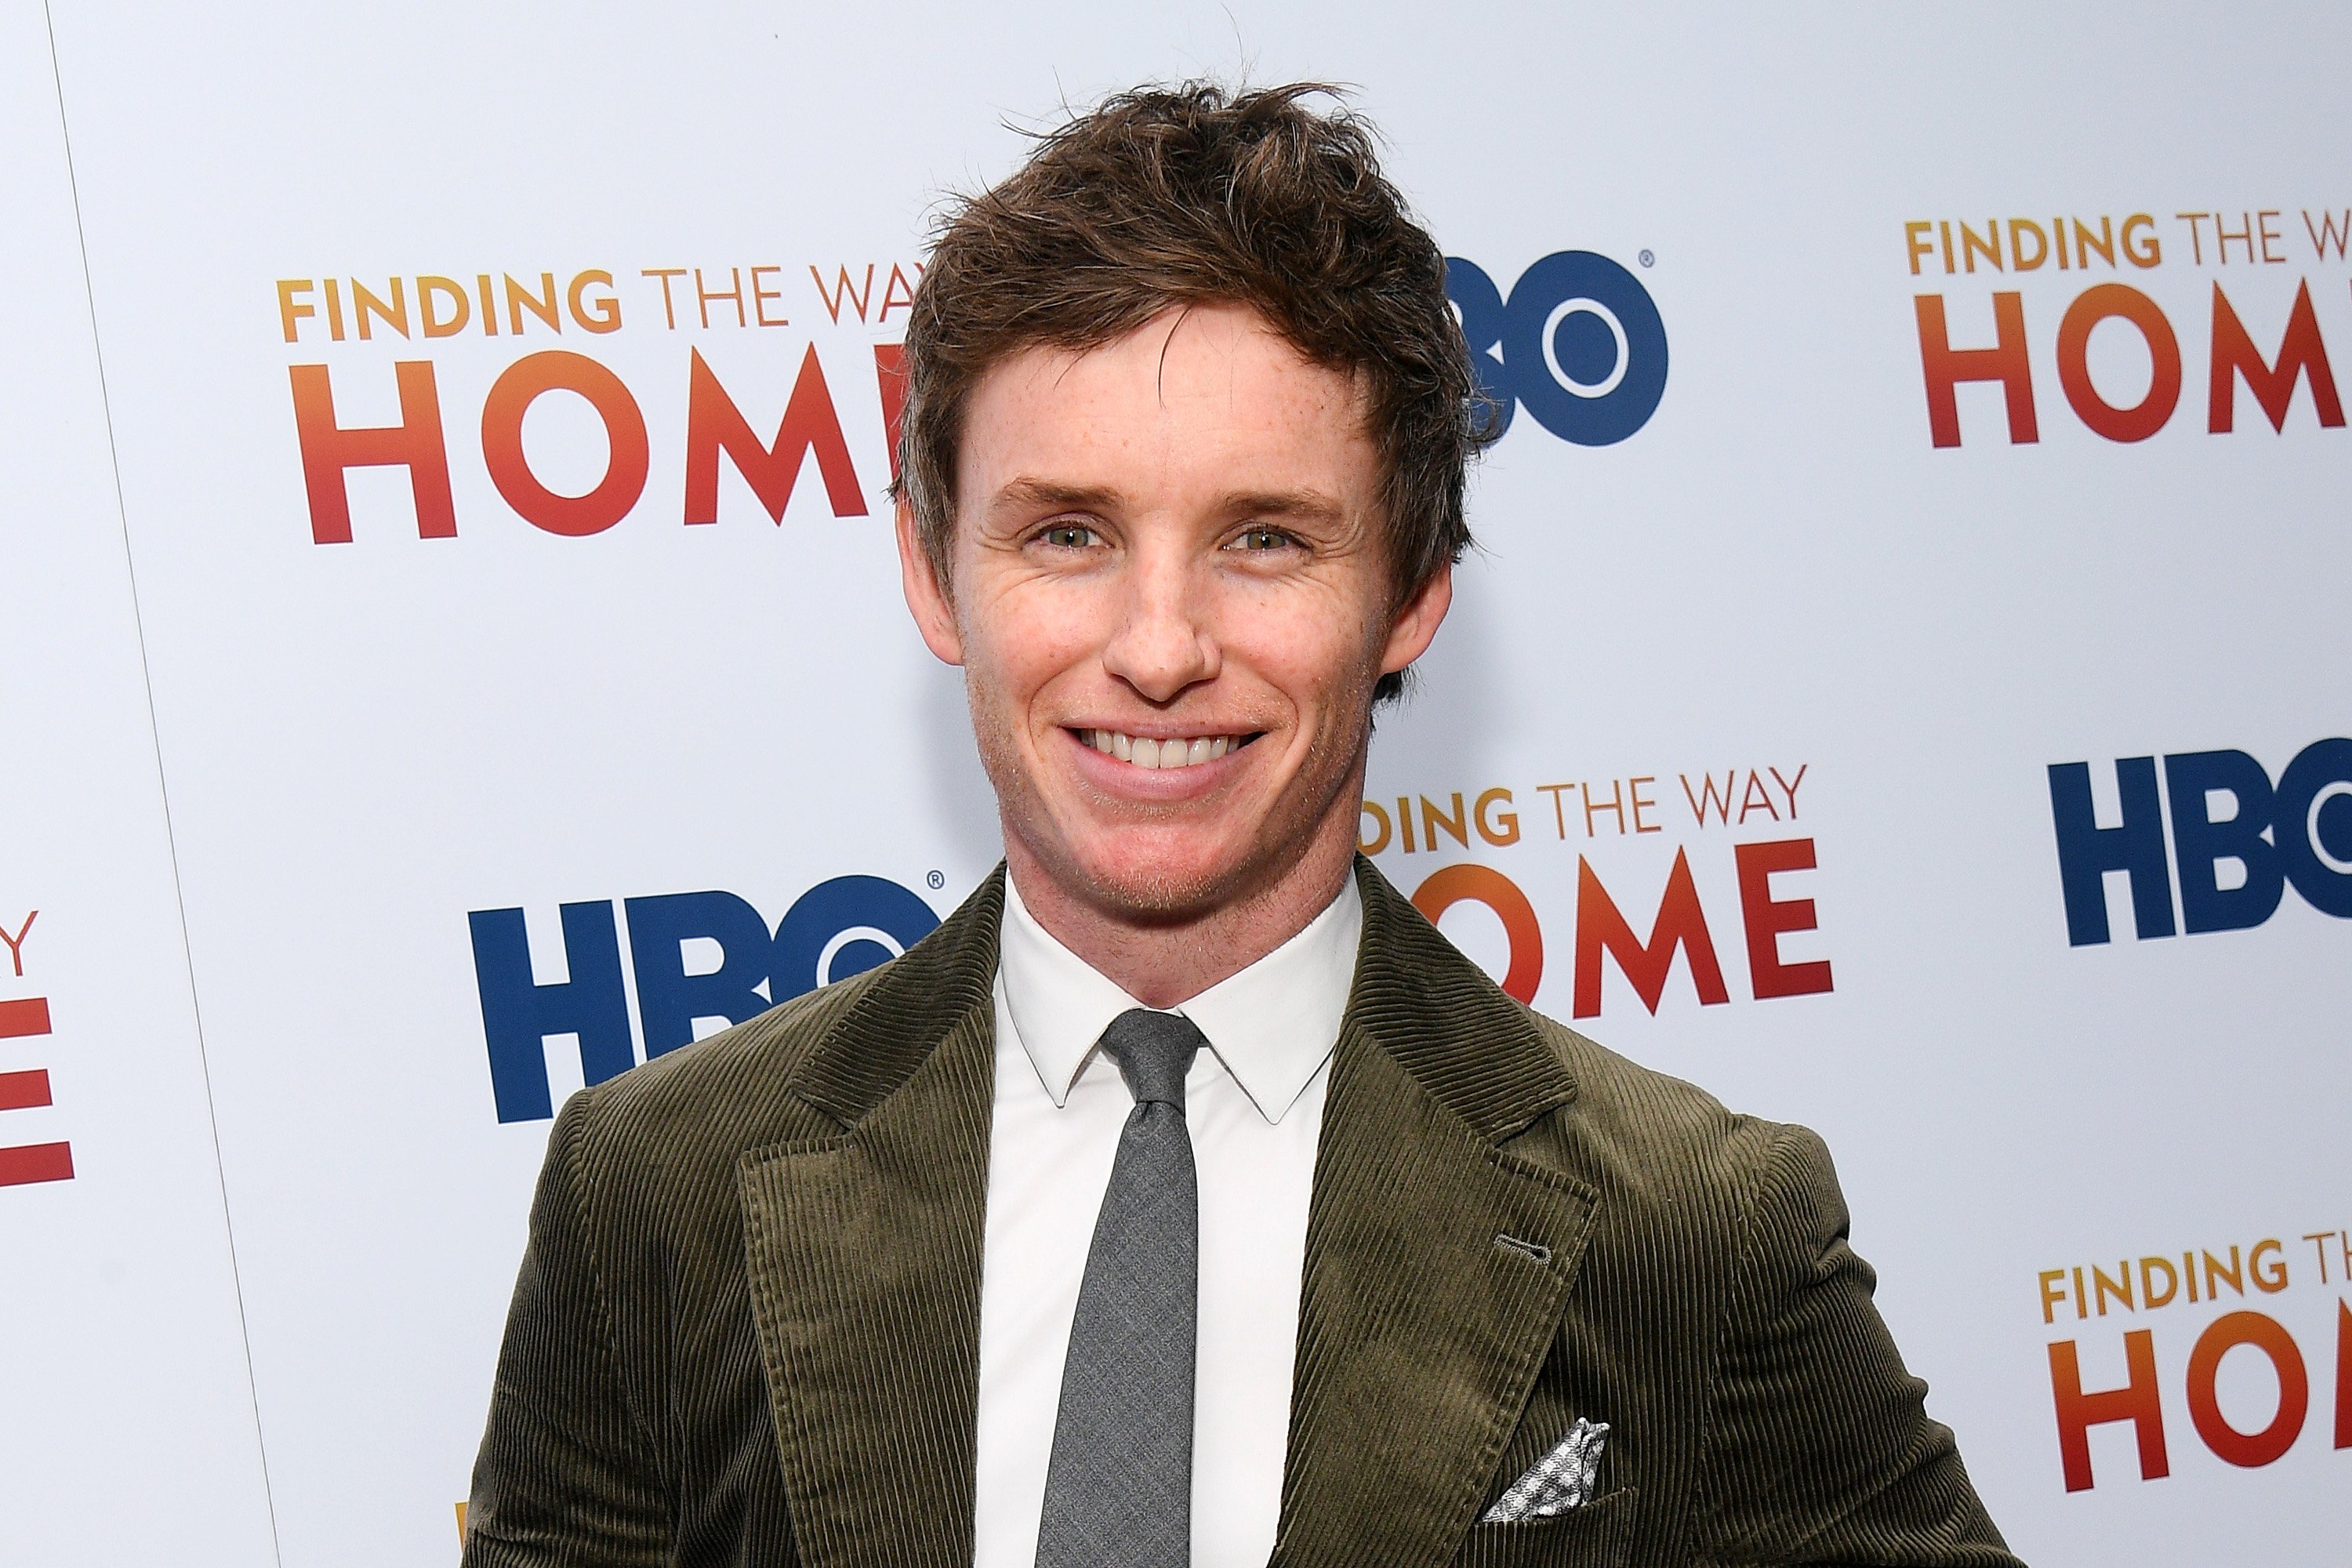 Eddie Redmayne attends HBO's "Finding The Way Home" World Premiere at Hudson Yards on December 11, 2019 in New York City. | Source: Getty Images